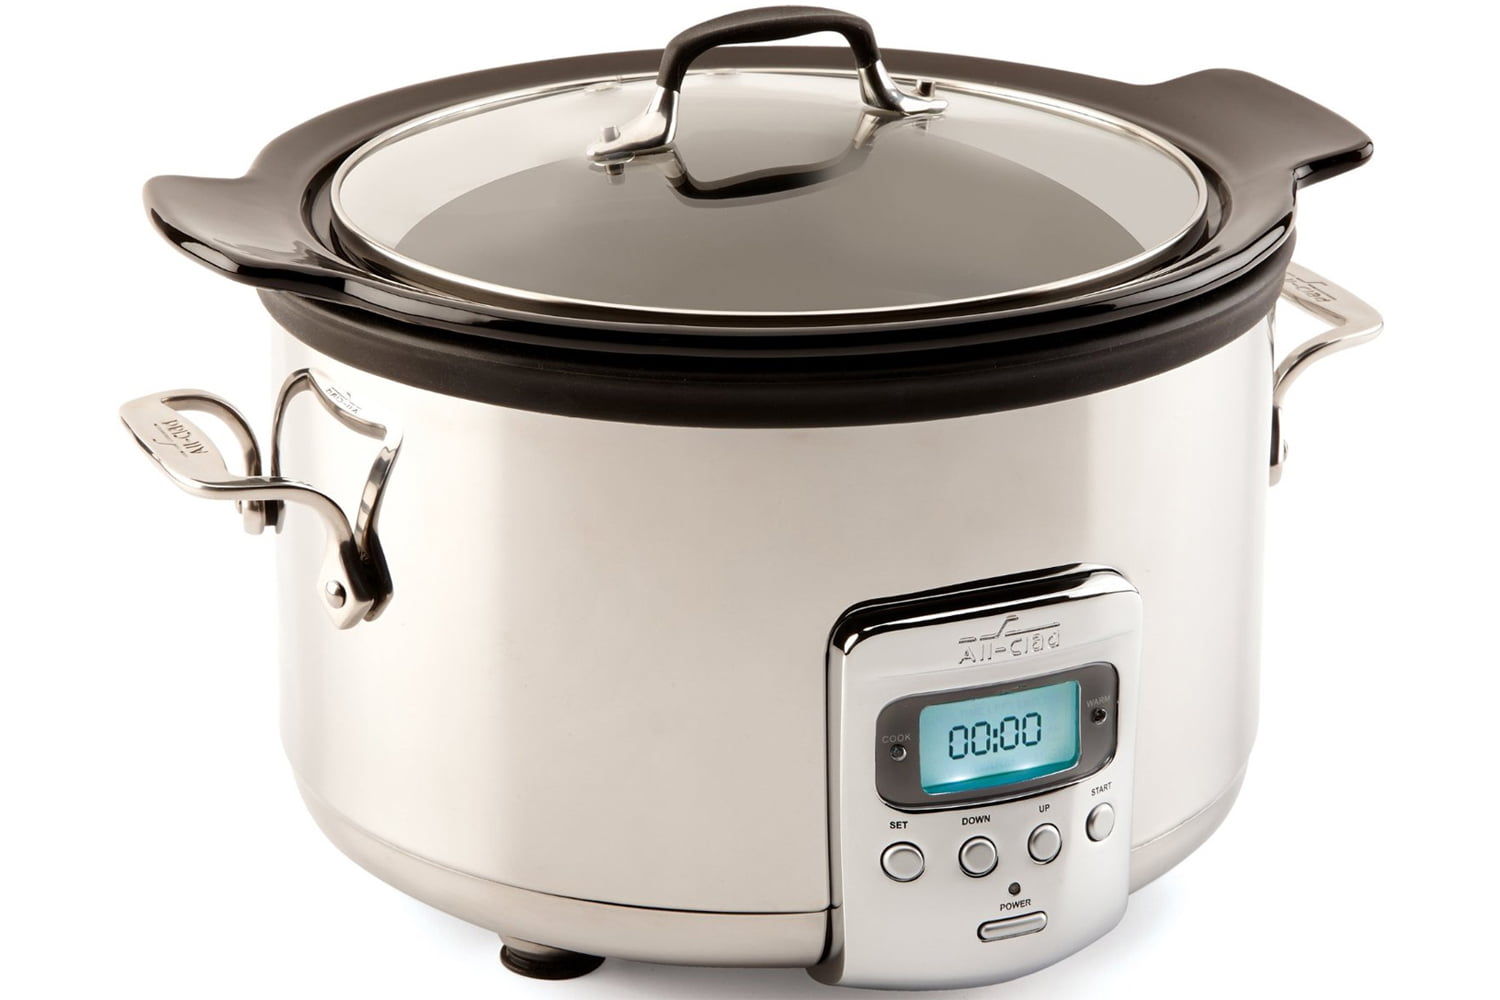 All-Clad SD710851 Stainless Steel Slow Cooker With Ceramic Insert 4 Quart for sale online 